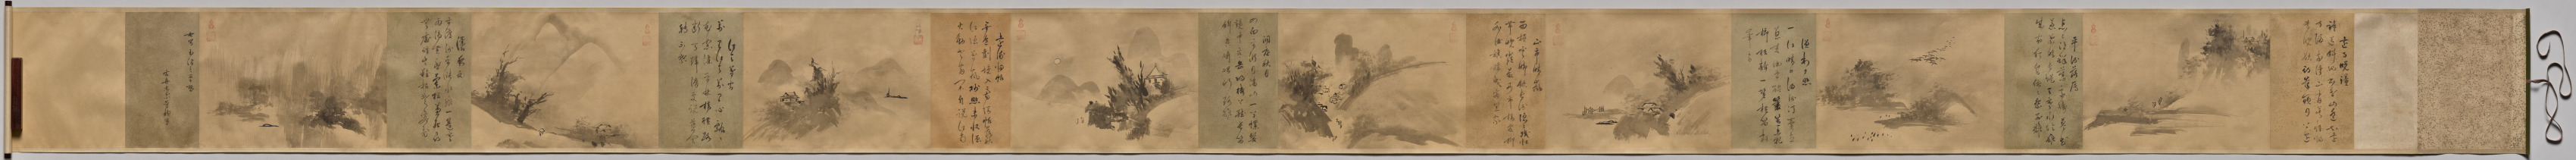 Poems and Pictures of the Eight Views of Xiao-Xiang